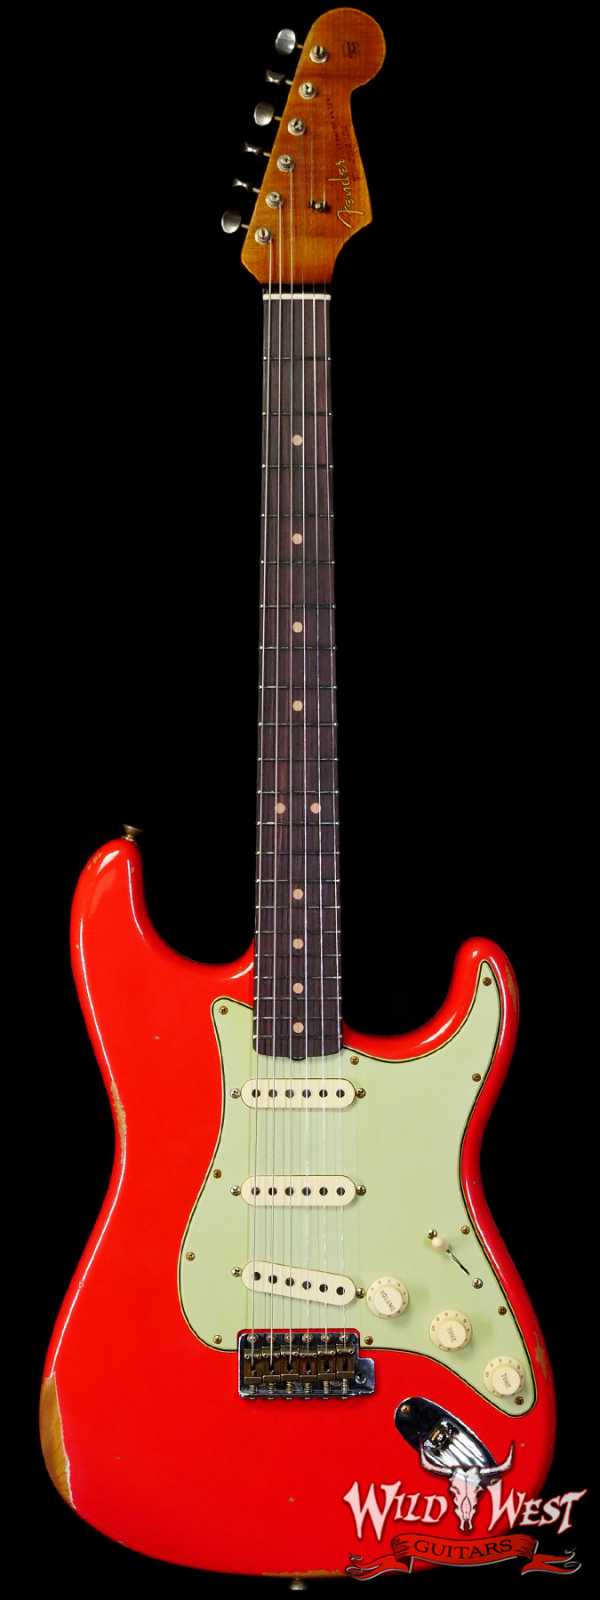 Fender Custom Shop 1963 Stratocaster Hand-Wound Pickups Roasted Maple Neck Relic Aged Fiesta Red